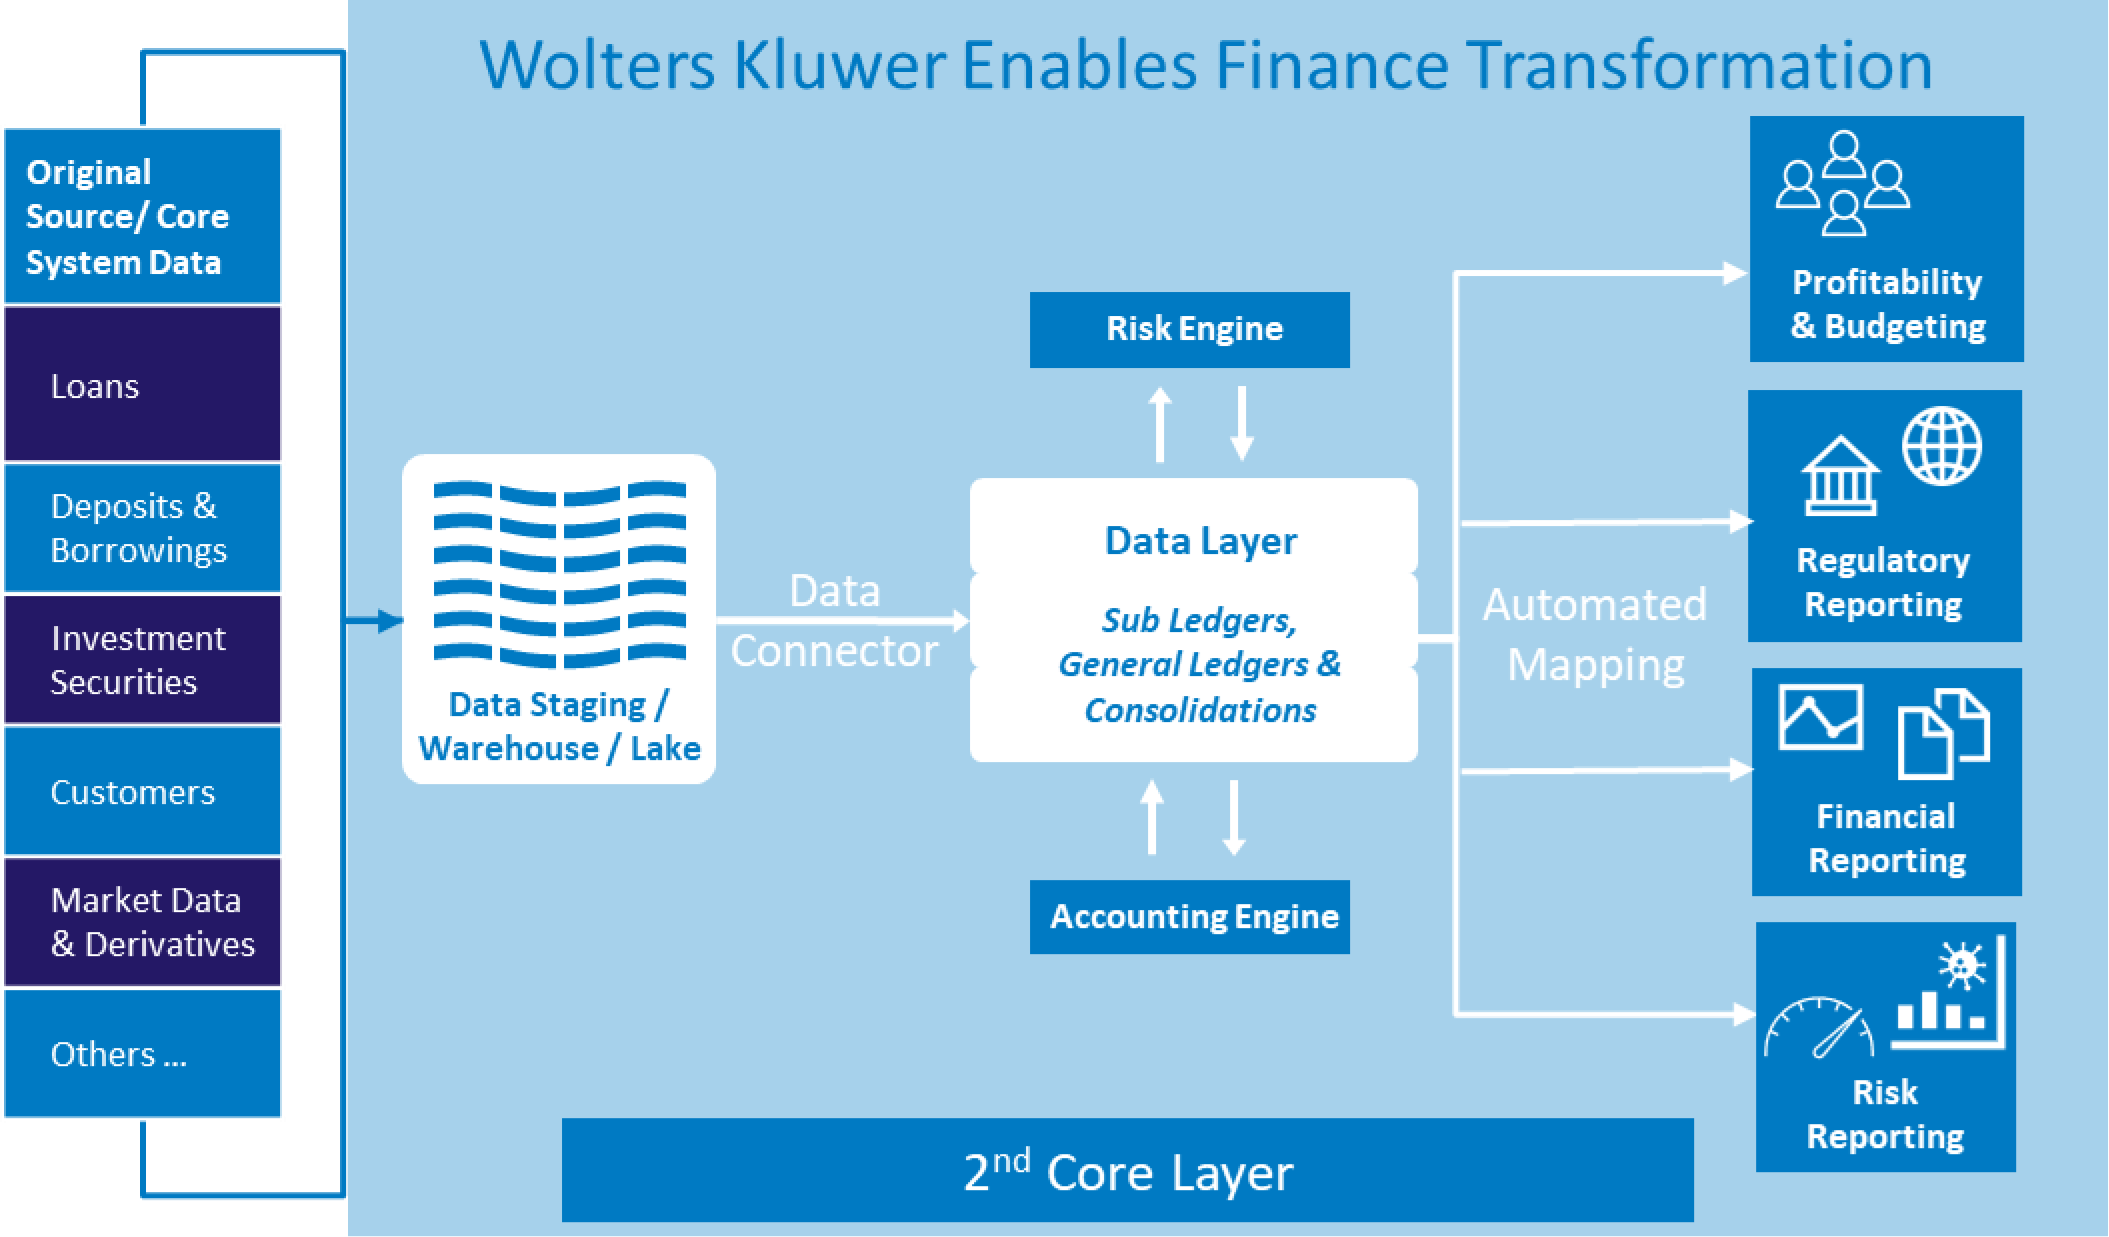 Wolters Kluwer Enables Finance Transformation